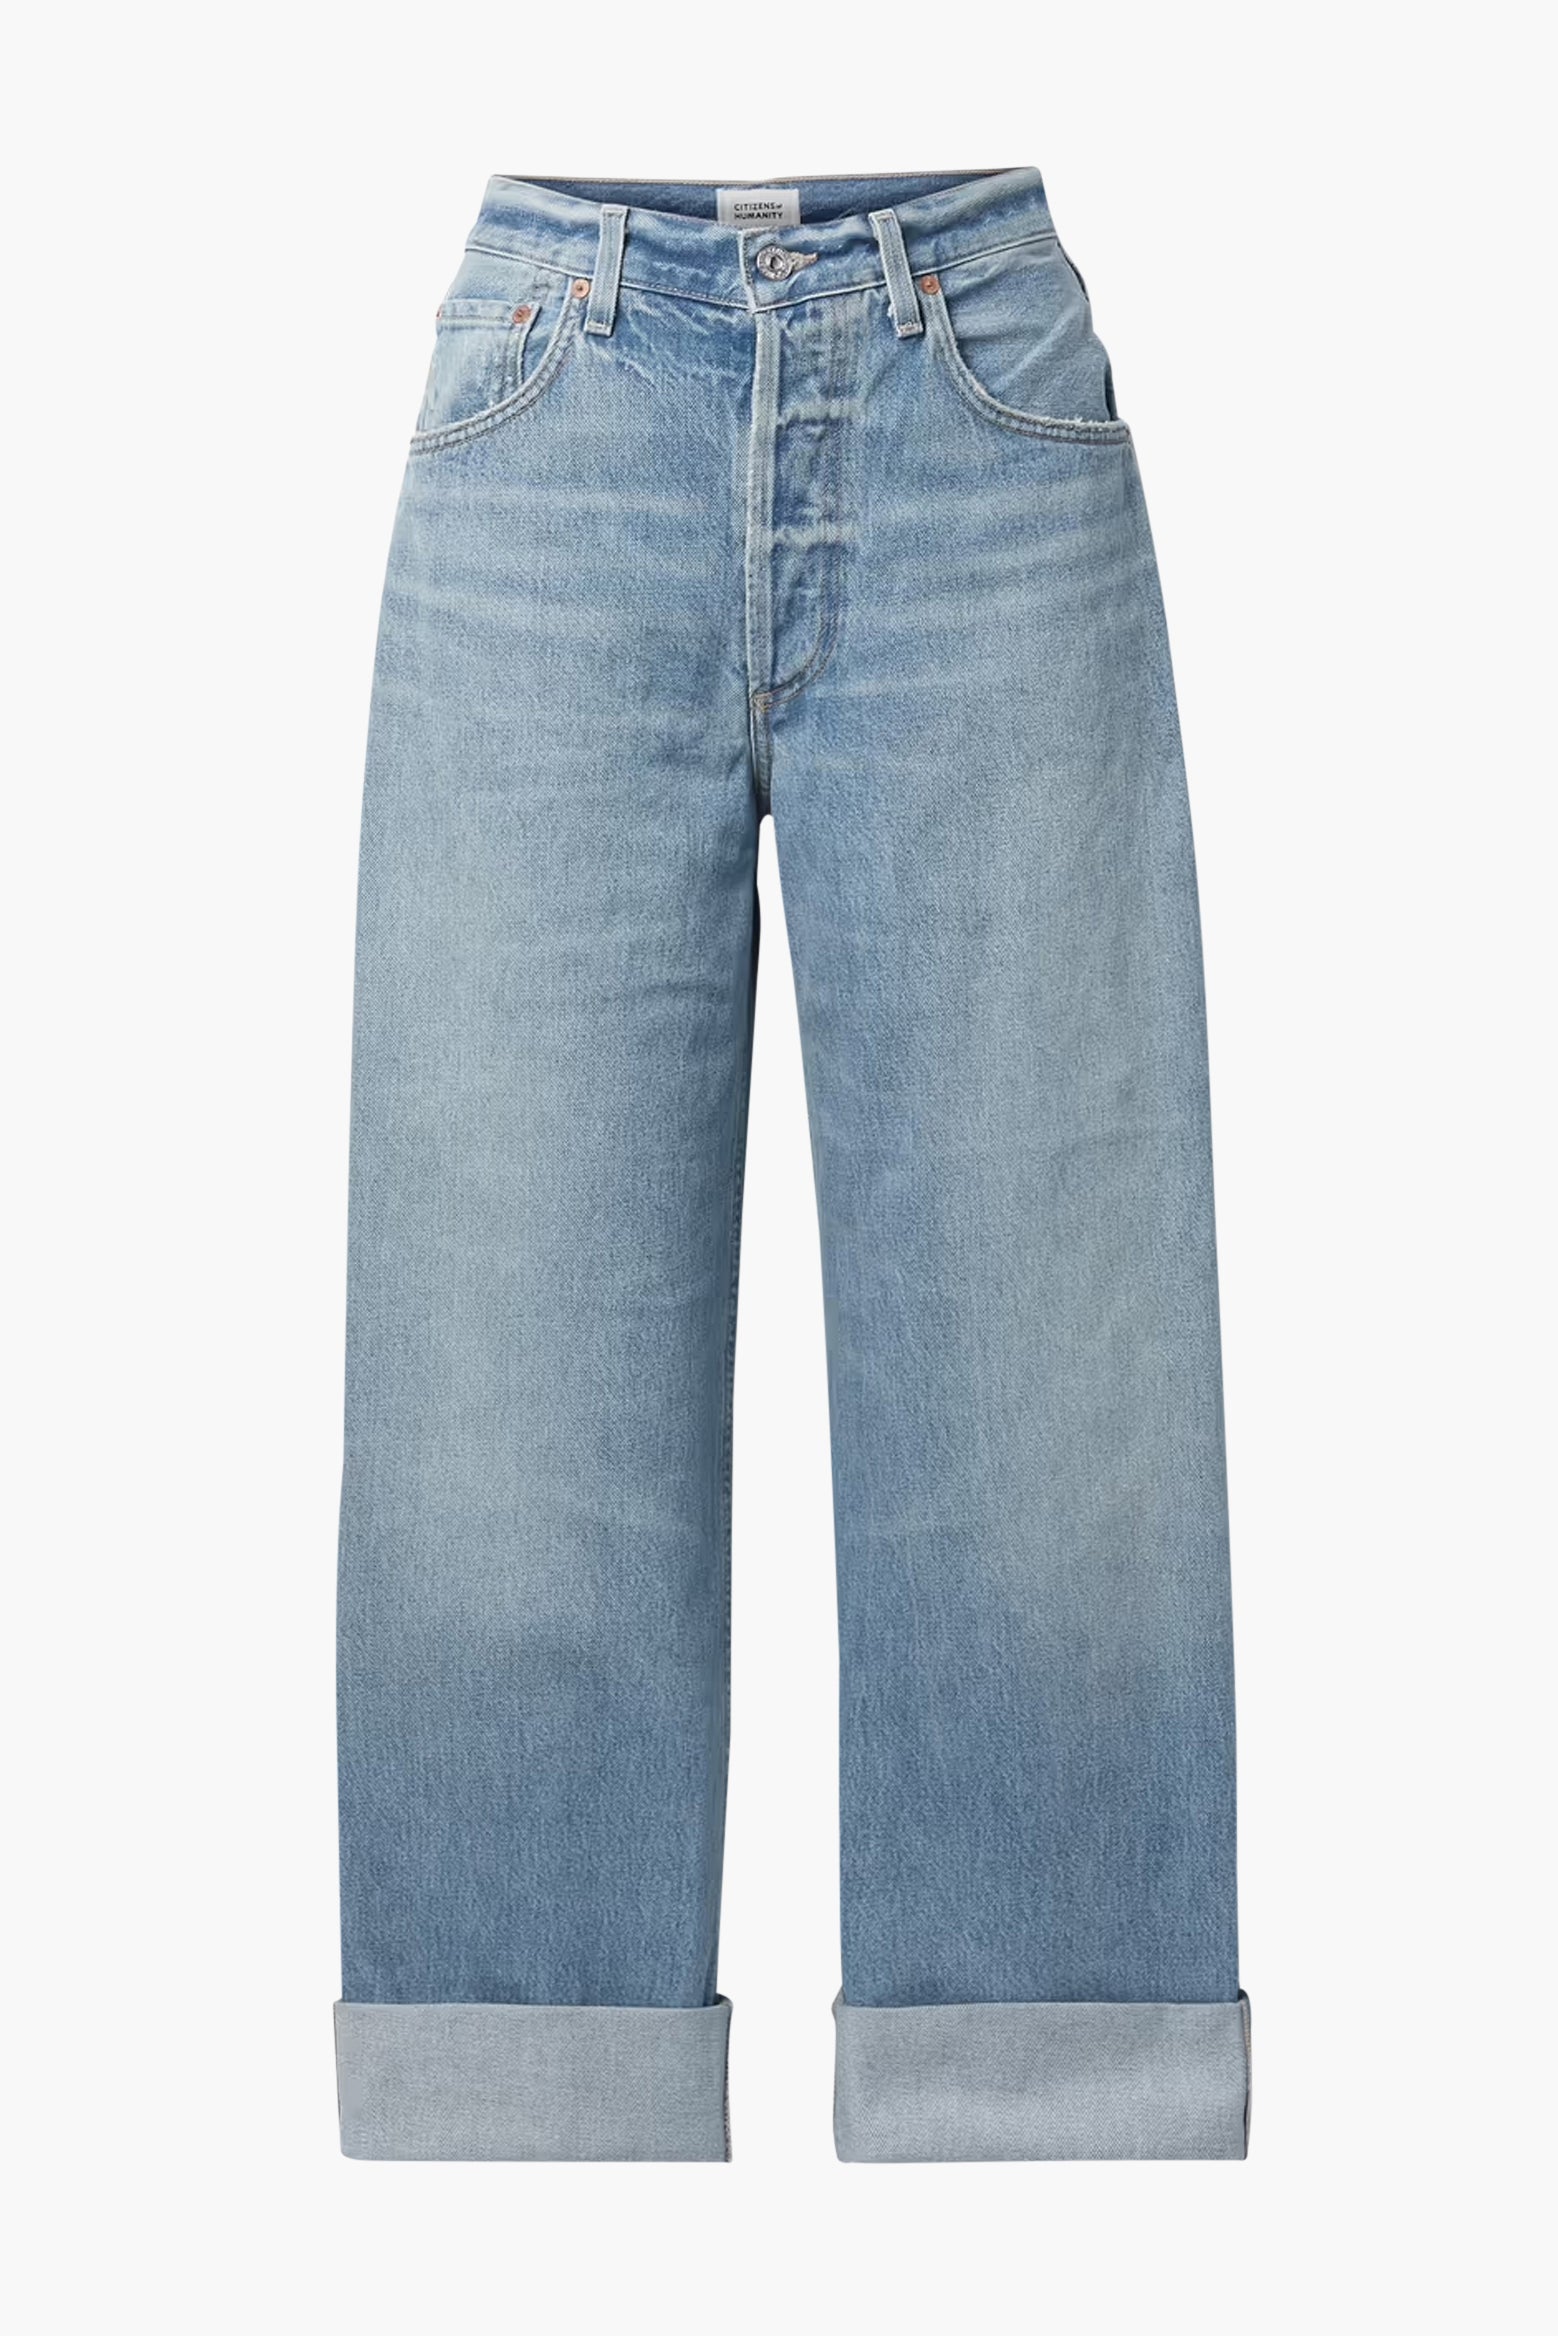 Citizens of Humanity Jolene High-Rise Slim Jeans | Anthropologie Japan -  Women's Clothing, Accessories & Home